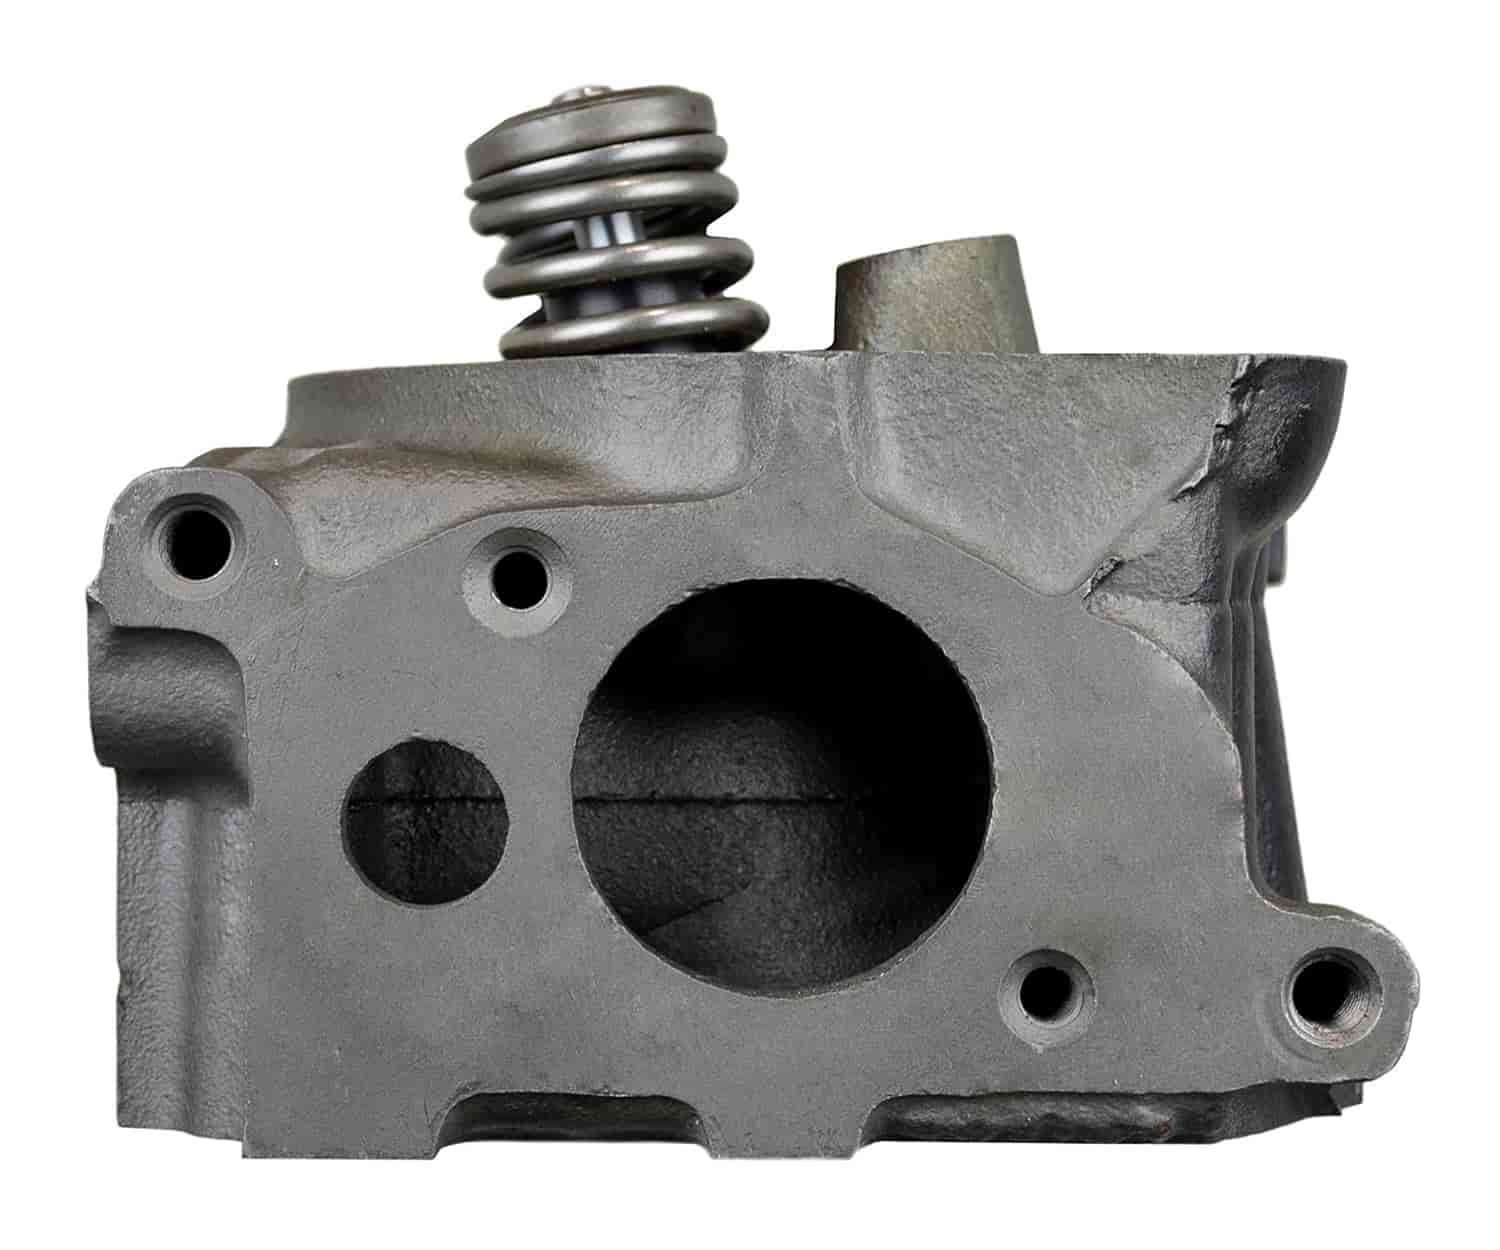 Remanufactured Cylinder Head for 1985-1986 Ford with 300ci/4.9L